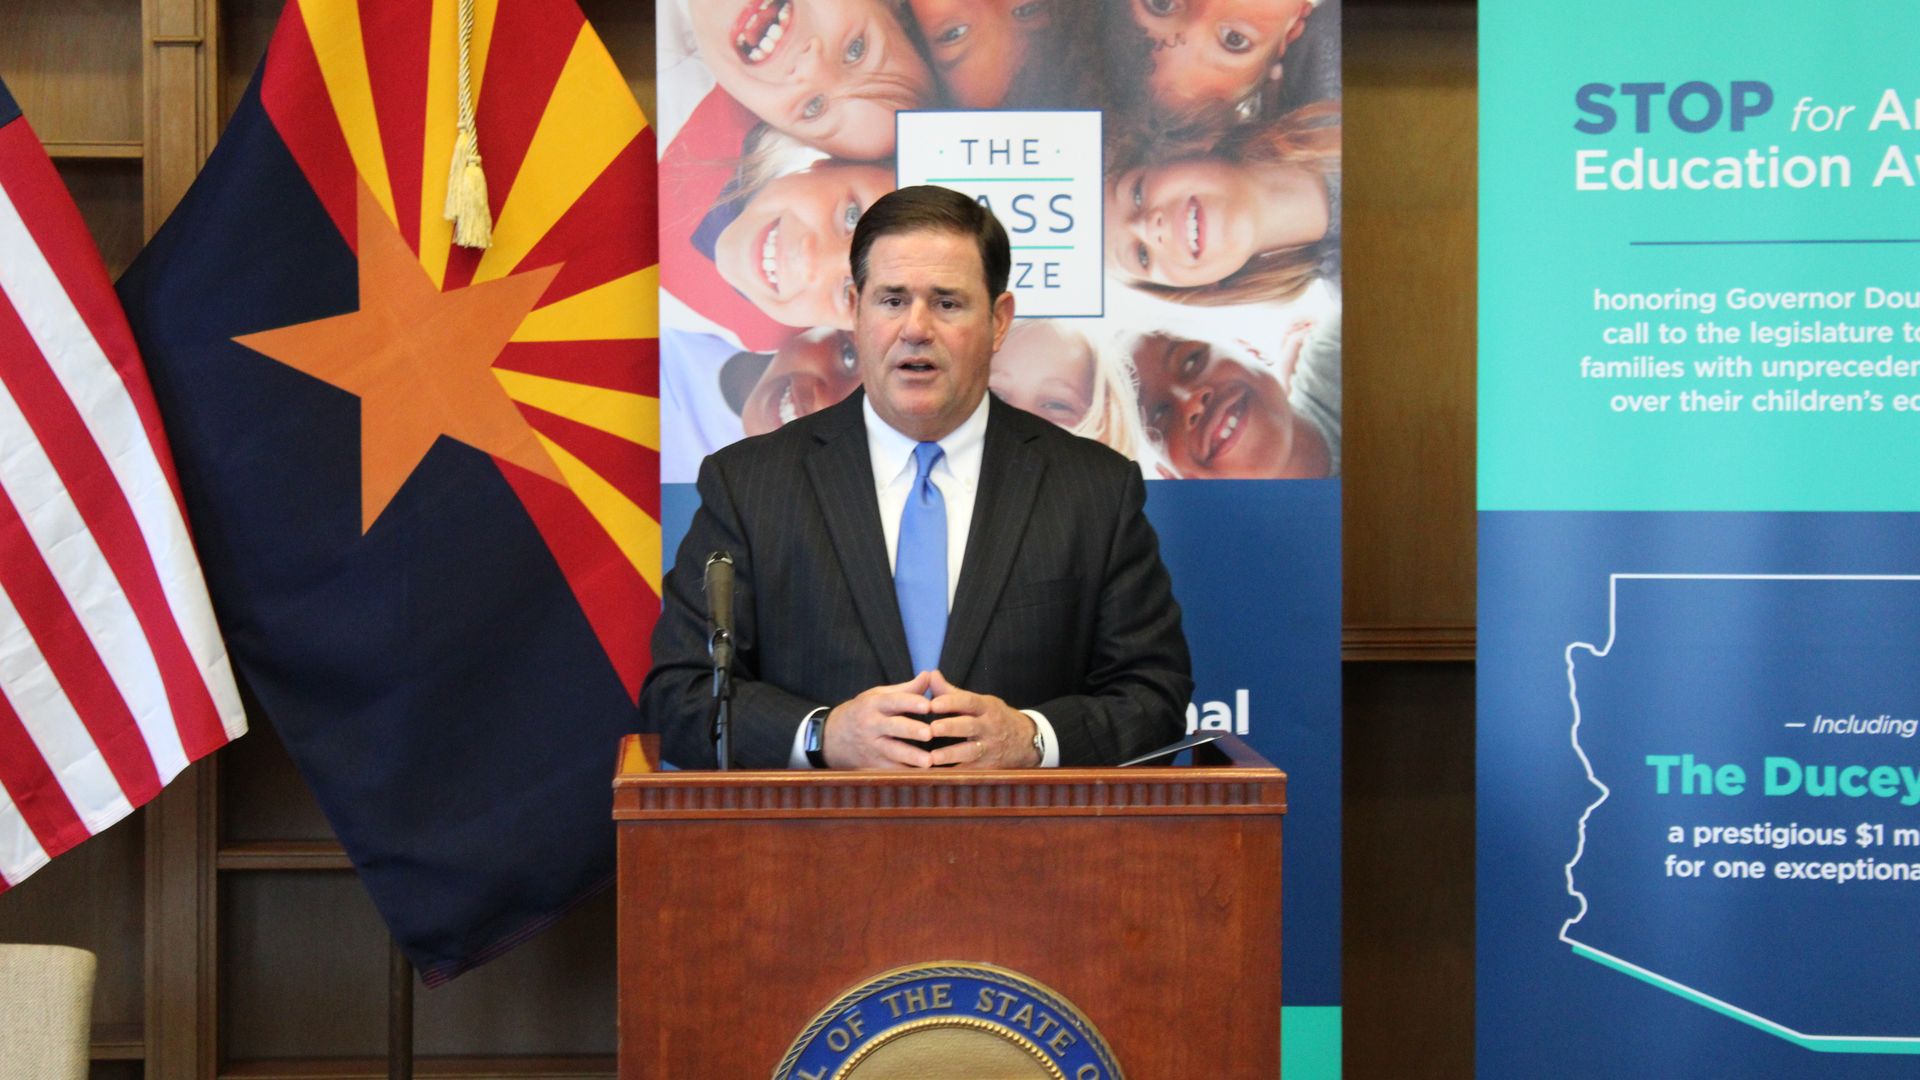 Arizona Governor Doug Ducey speaks behind a lectern